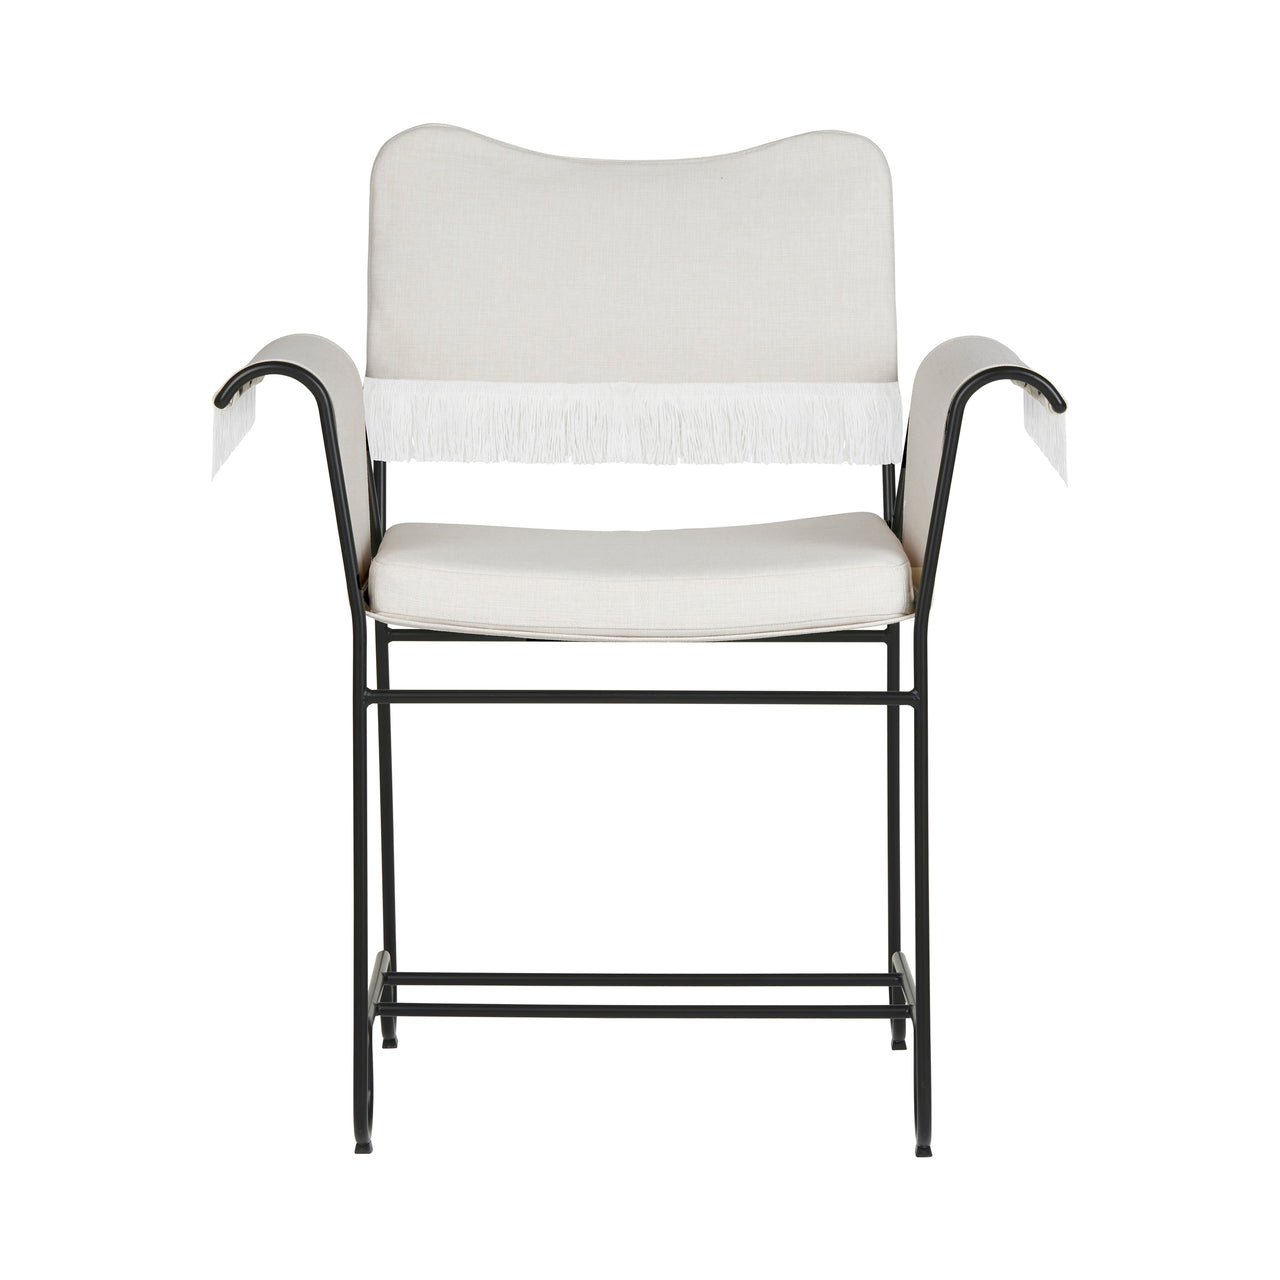 Tropique Dining Chair: Outdoor + With Fringes + Black + Leslie 06